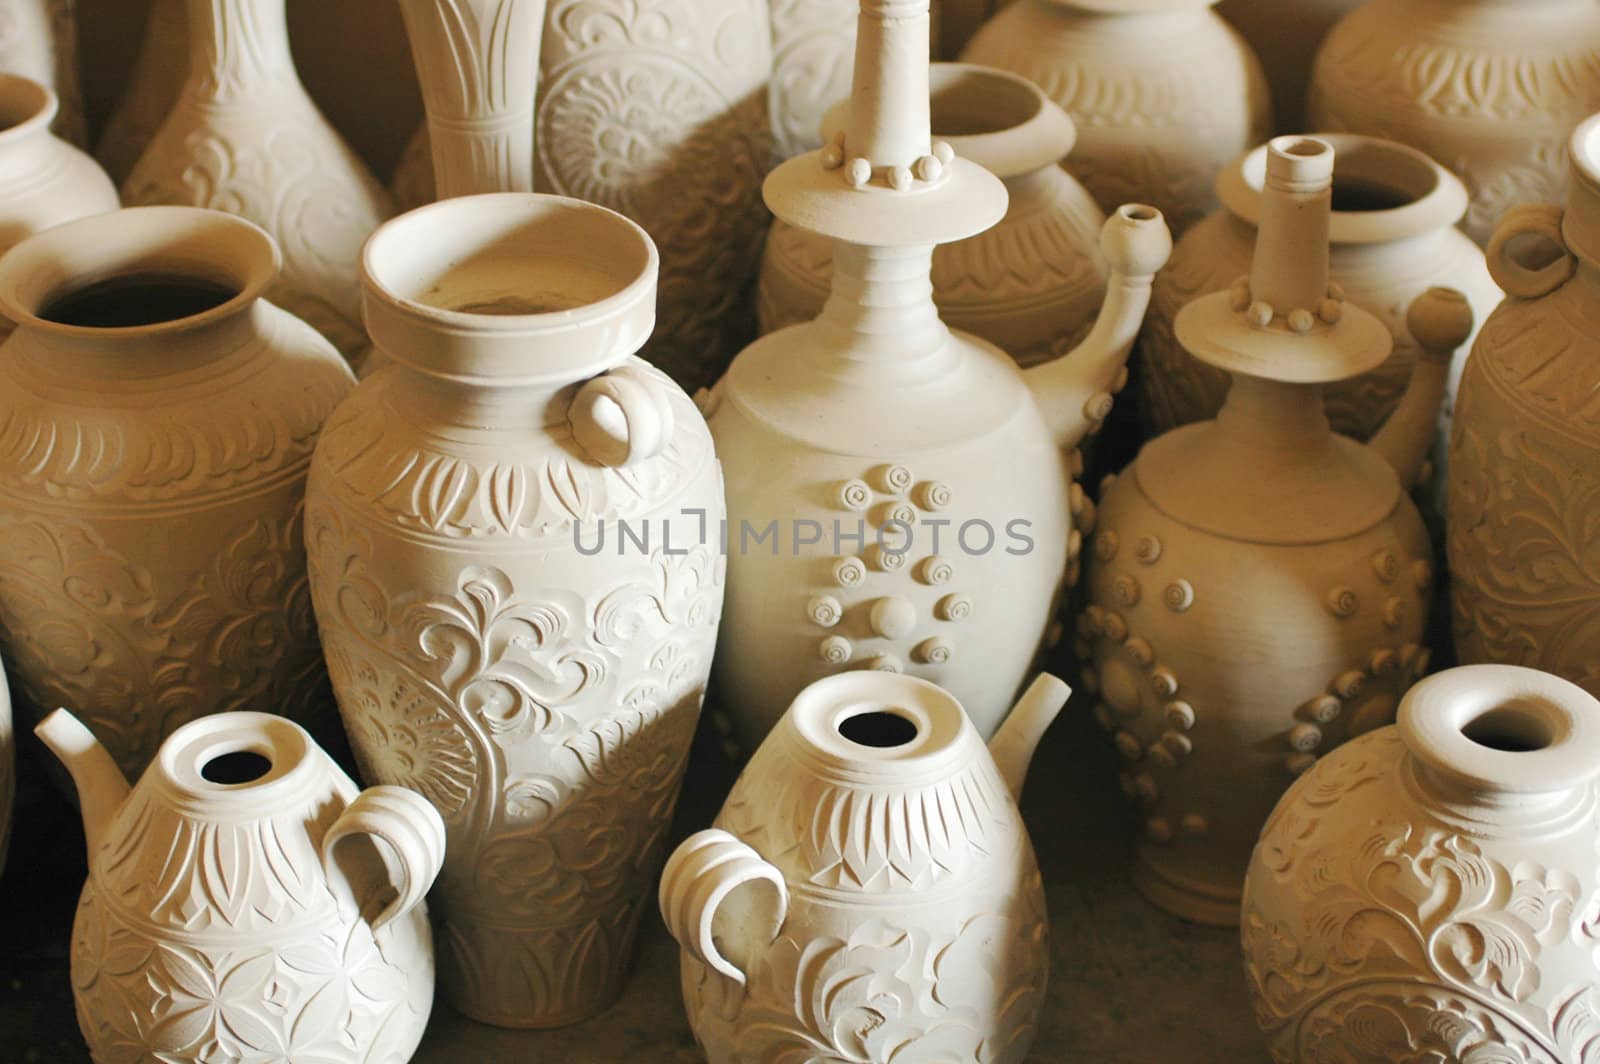 Piles of pottery Jugs and Vases in China